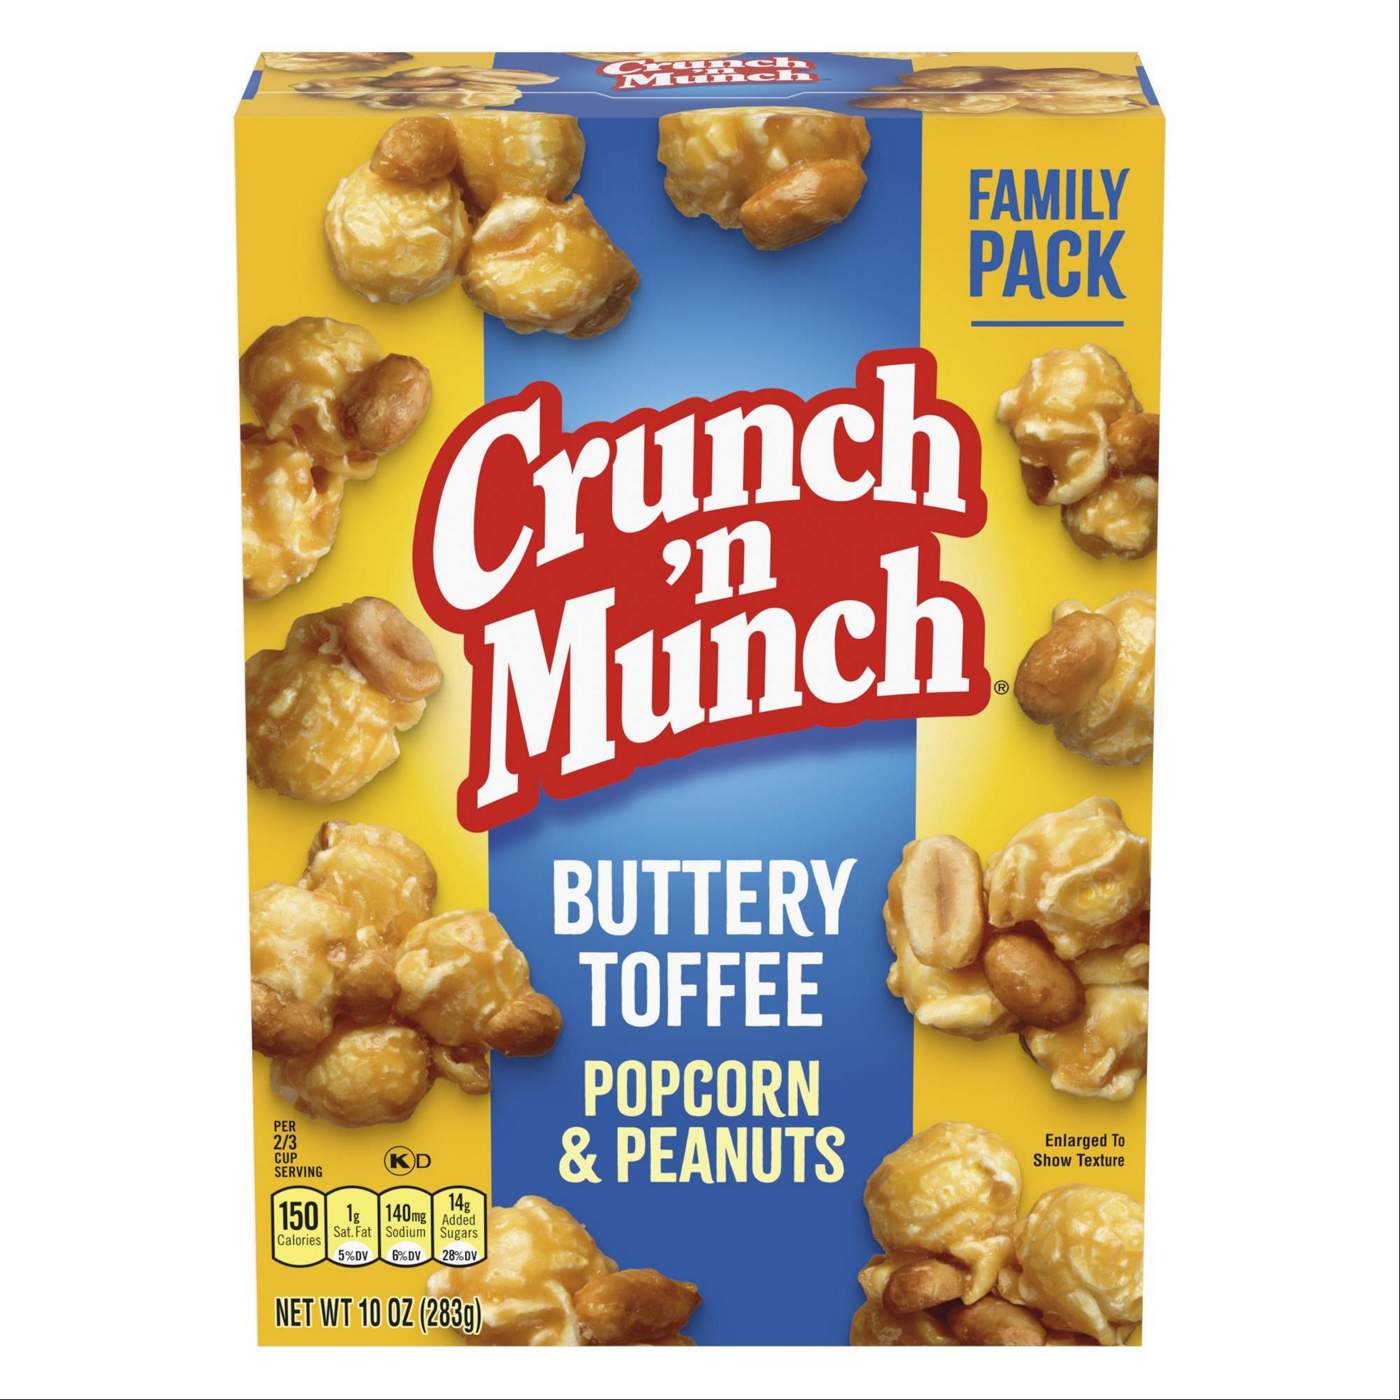 Crunch 'n Munch Buttery Toffee Popcorn with Peanuts; image 1 of 5